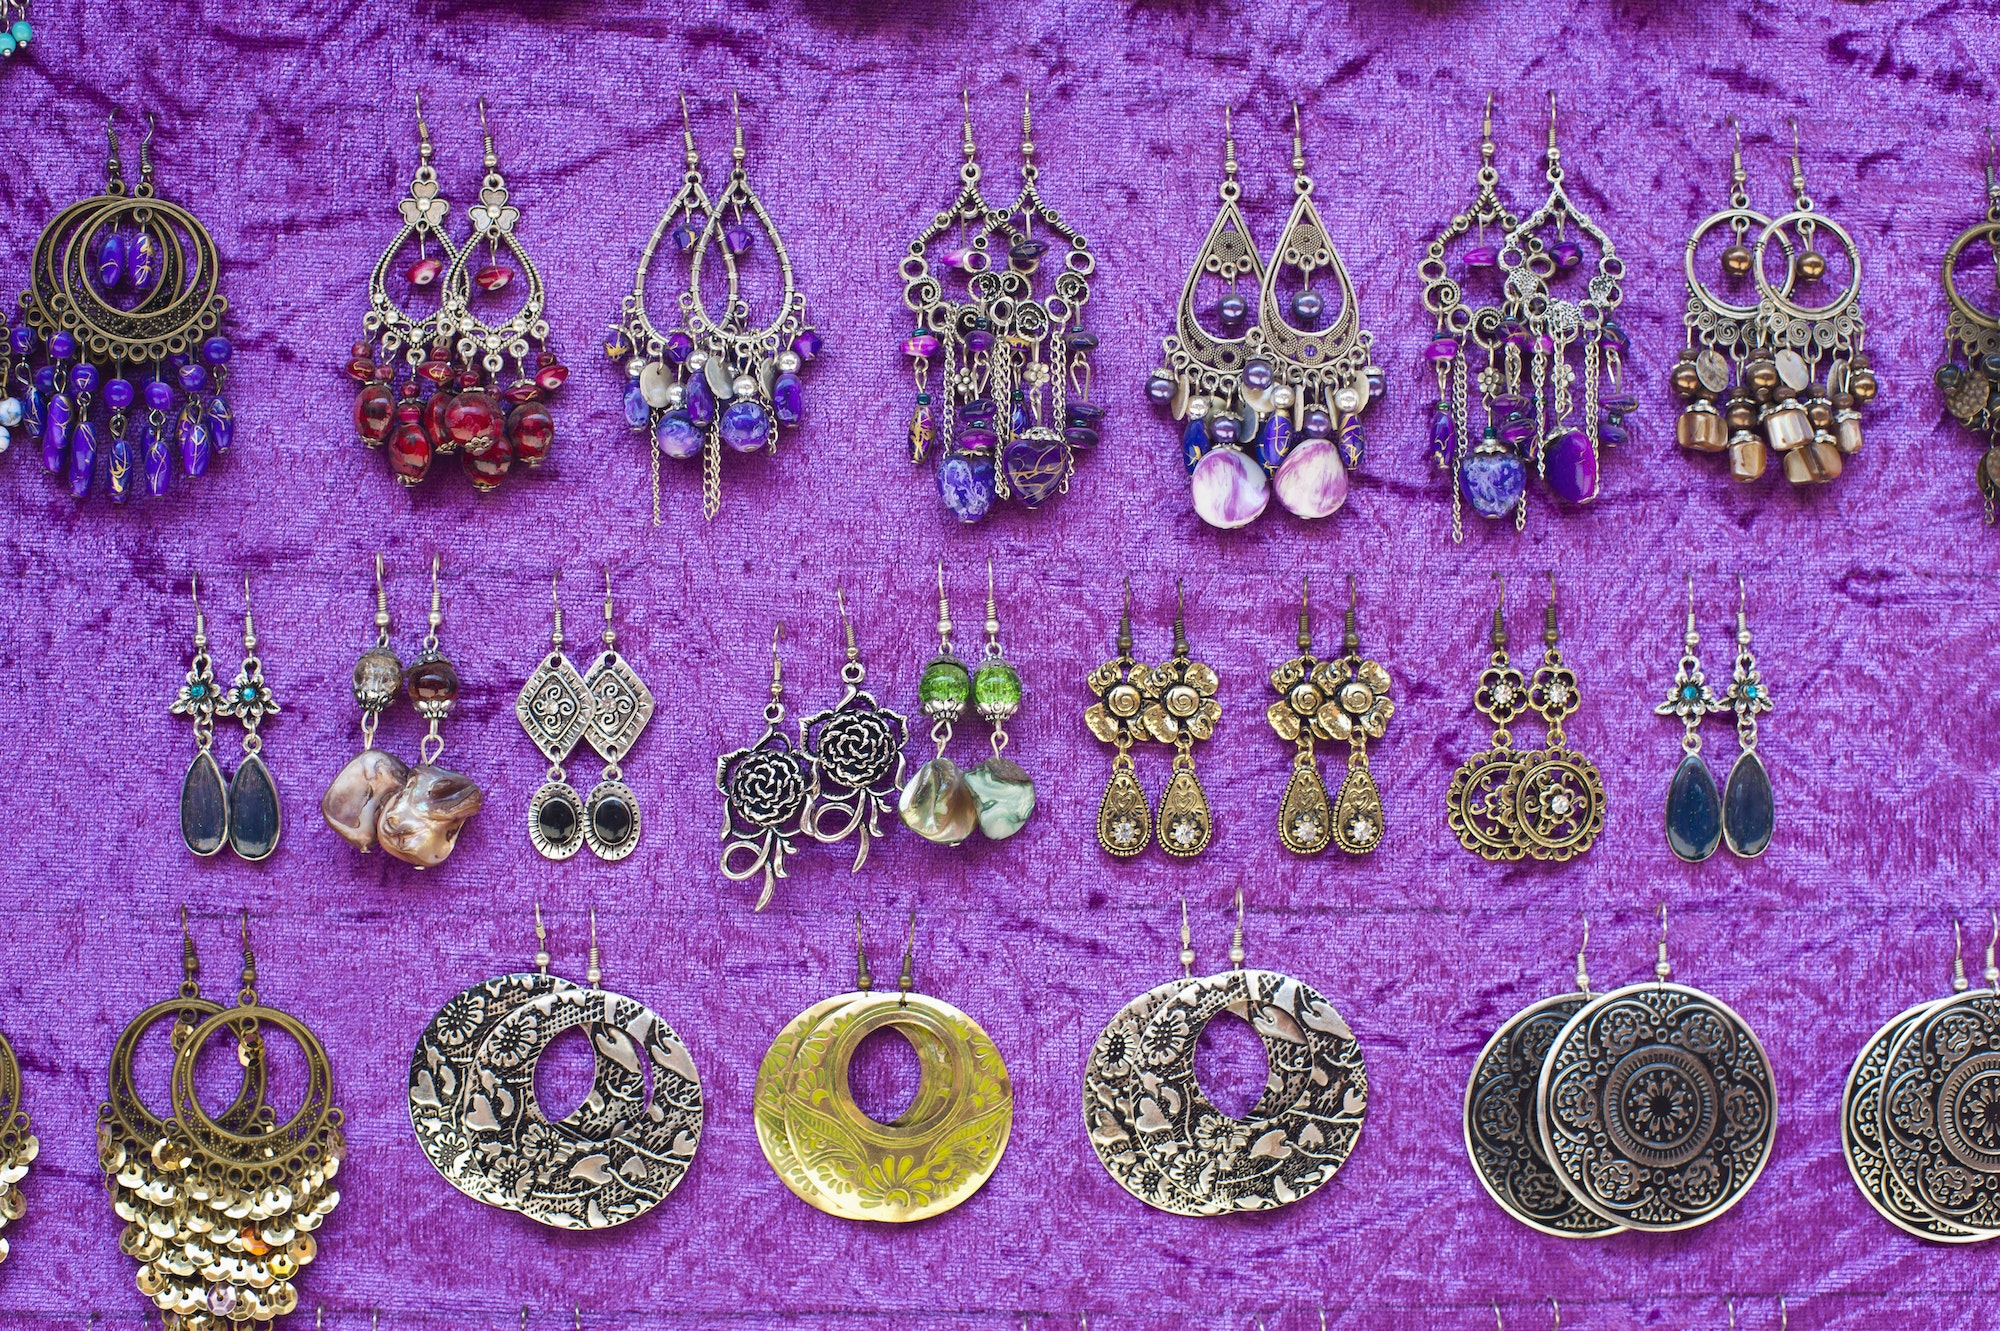 Earrings for sale in souks in Marrakech old Medina, Place Djemaa El Fna Square, Morocco, North Afric